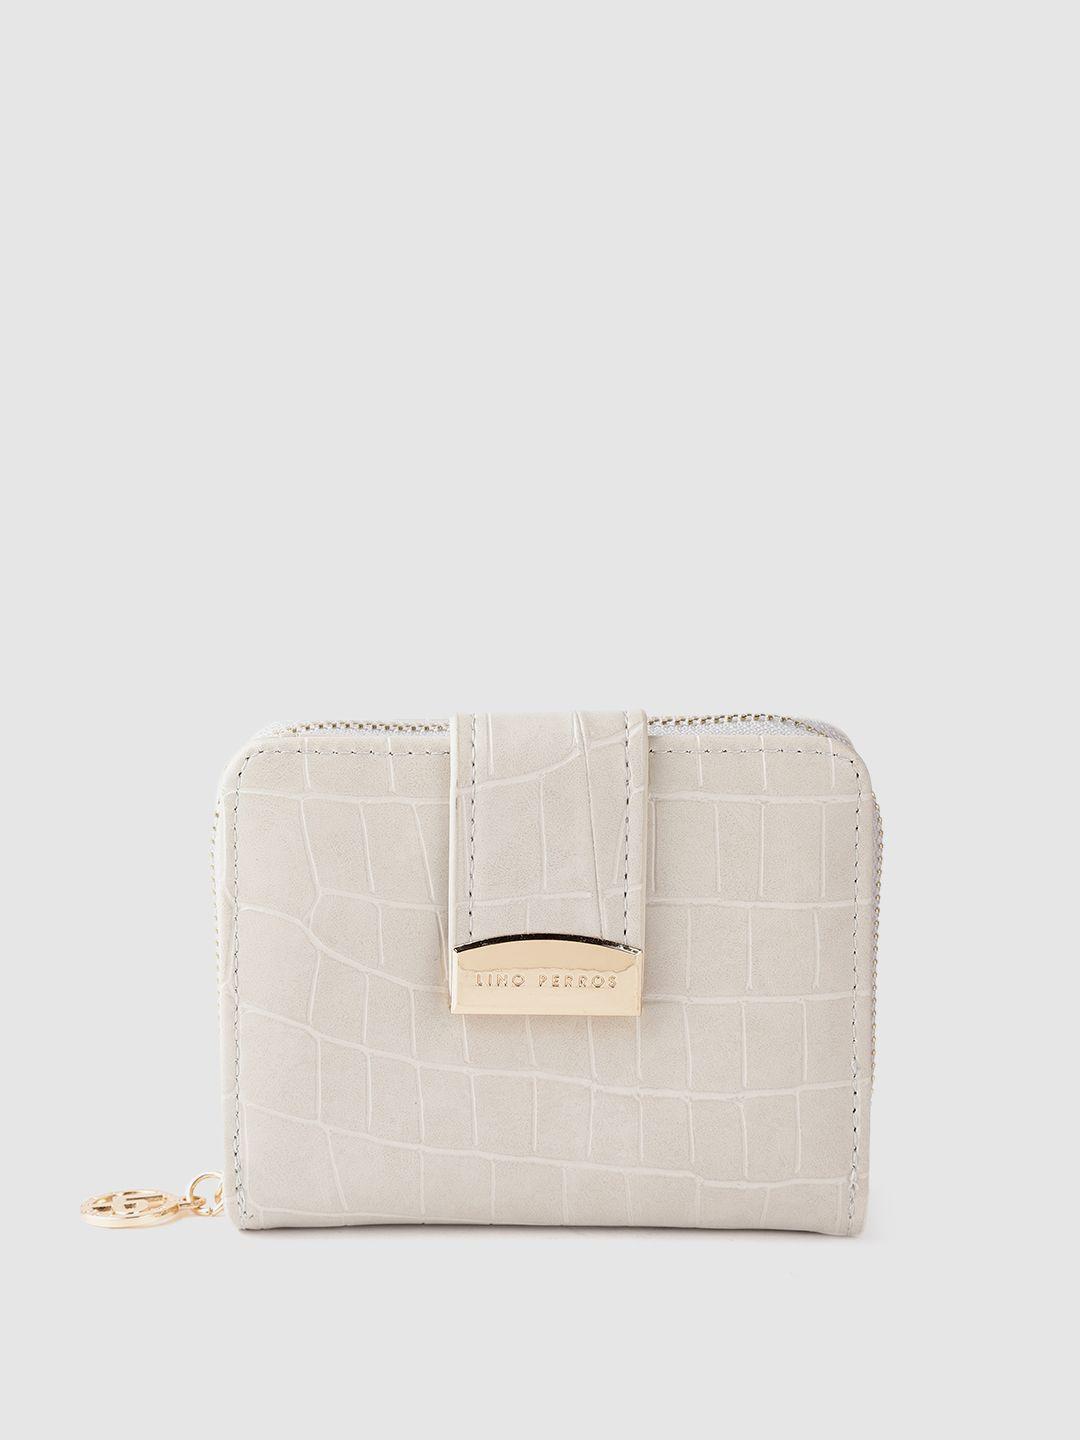 lino perros women off-white croc textured two fold wallet